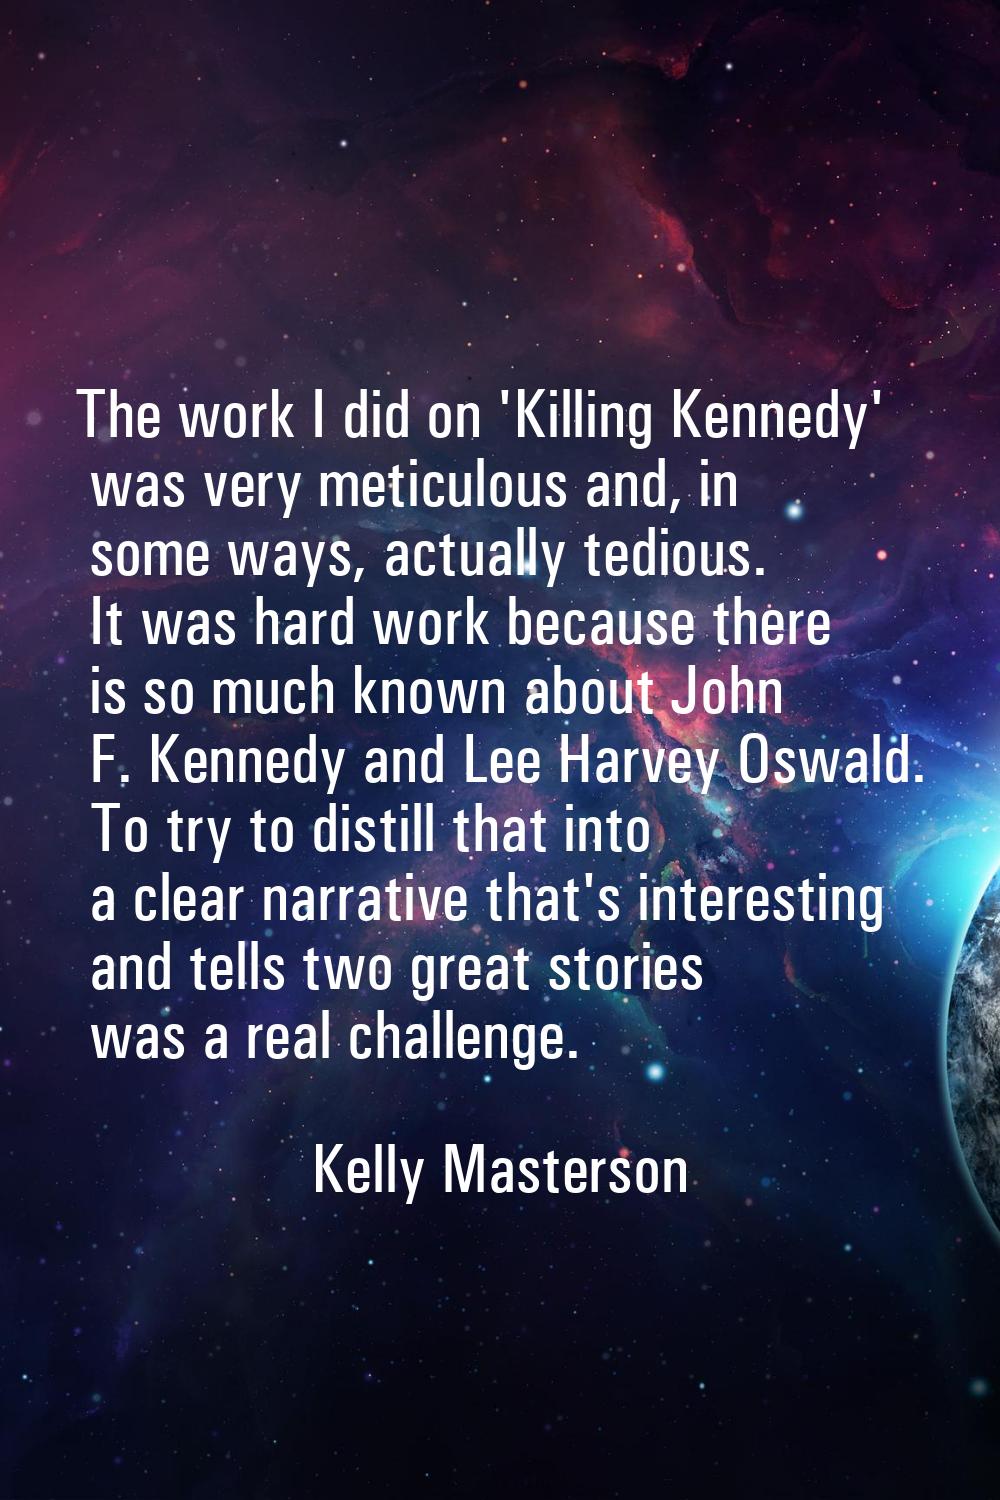 The work I did on 'Killing Kennedy' was very meticulous and, in some ways, actually tedious. It was